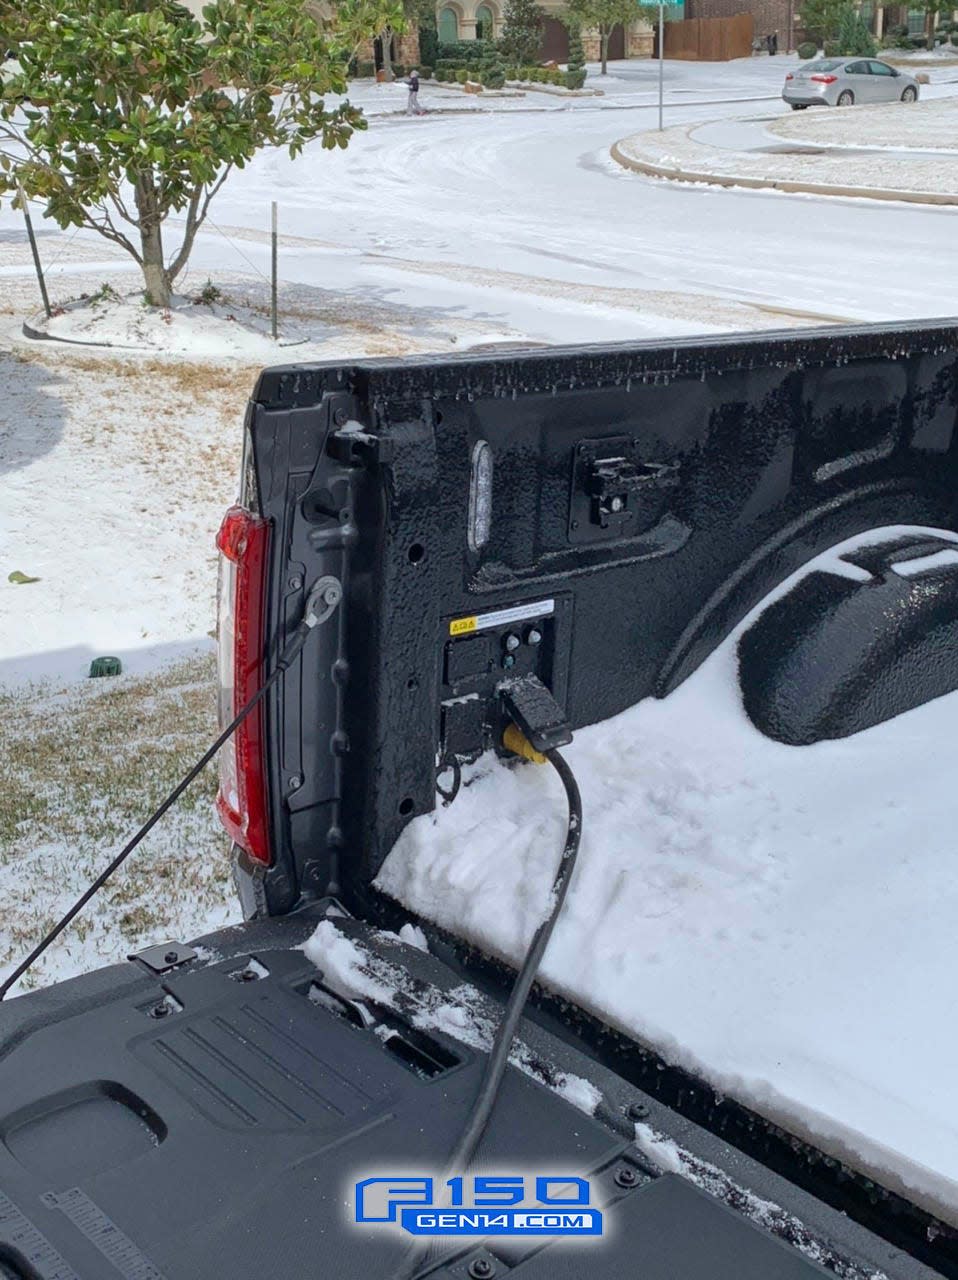 This man used his Ford F-150 2021 to heat his home during the Texas winter storm blackout